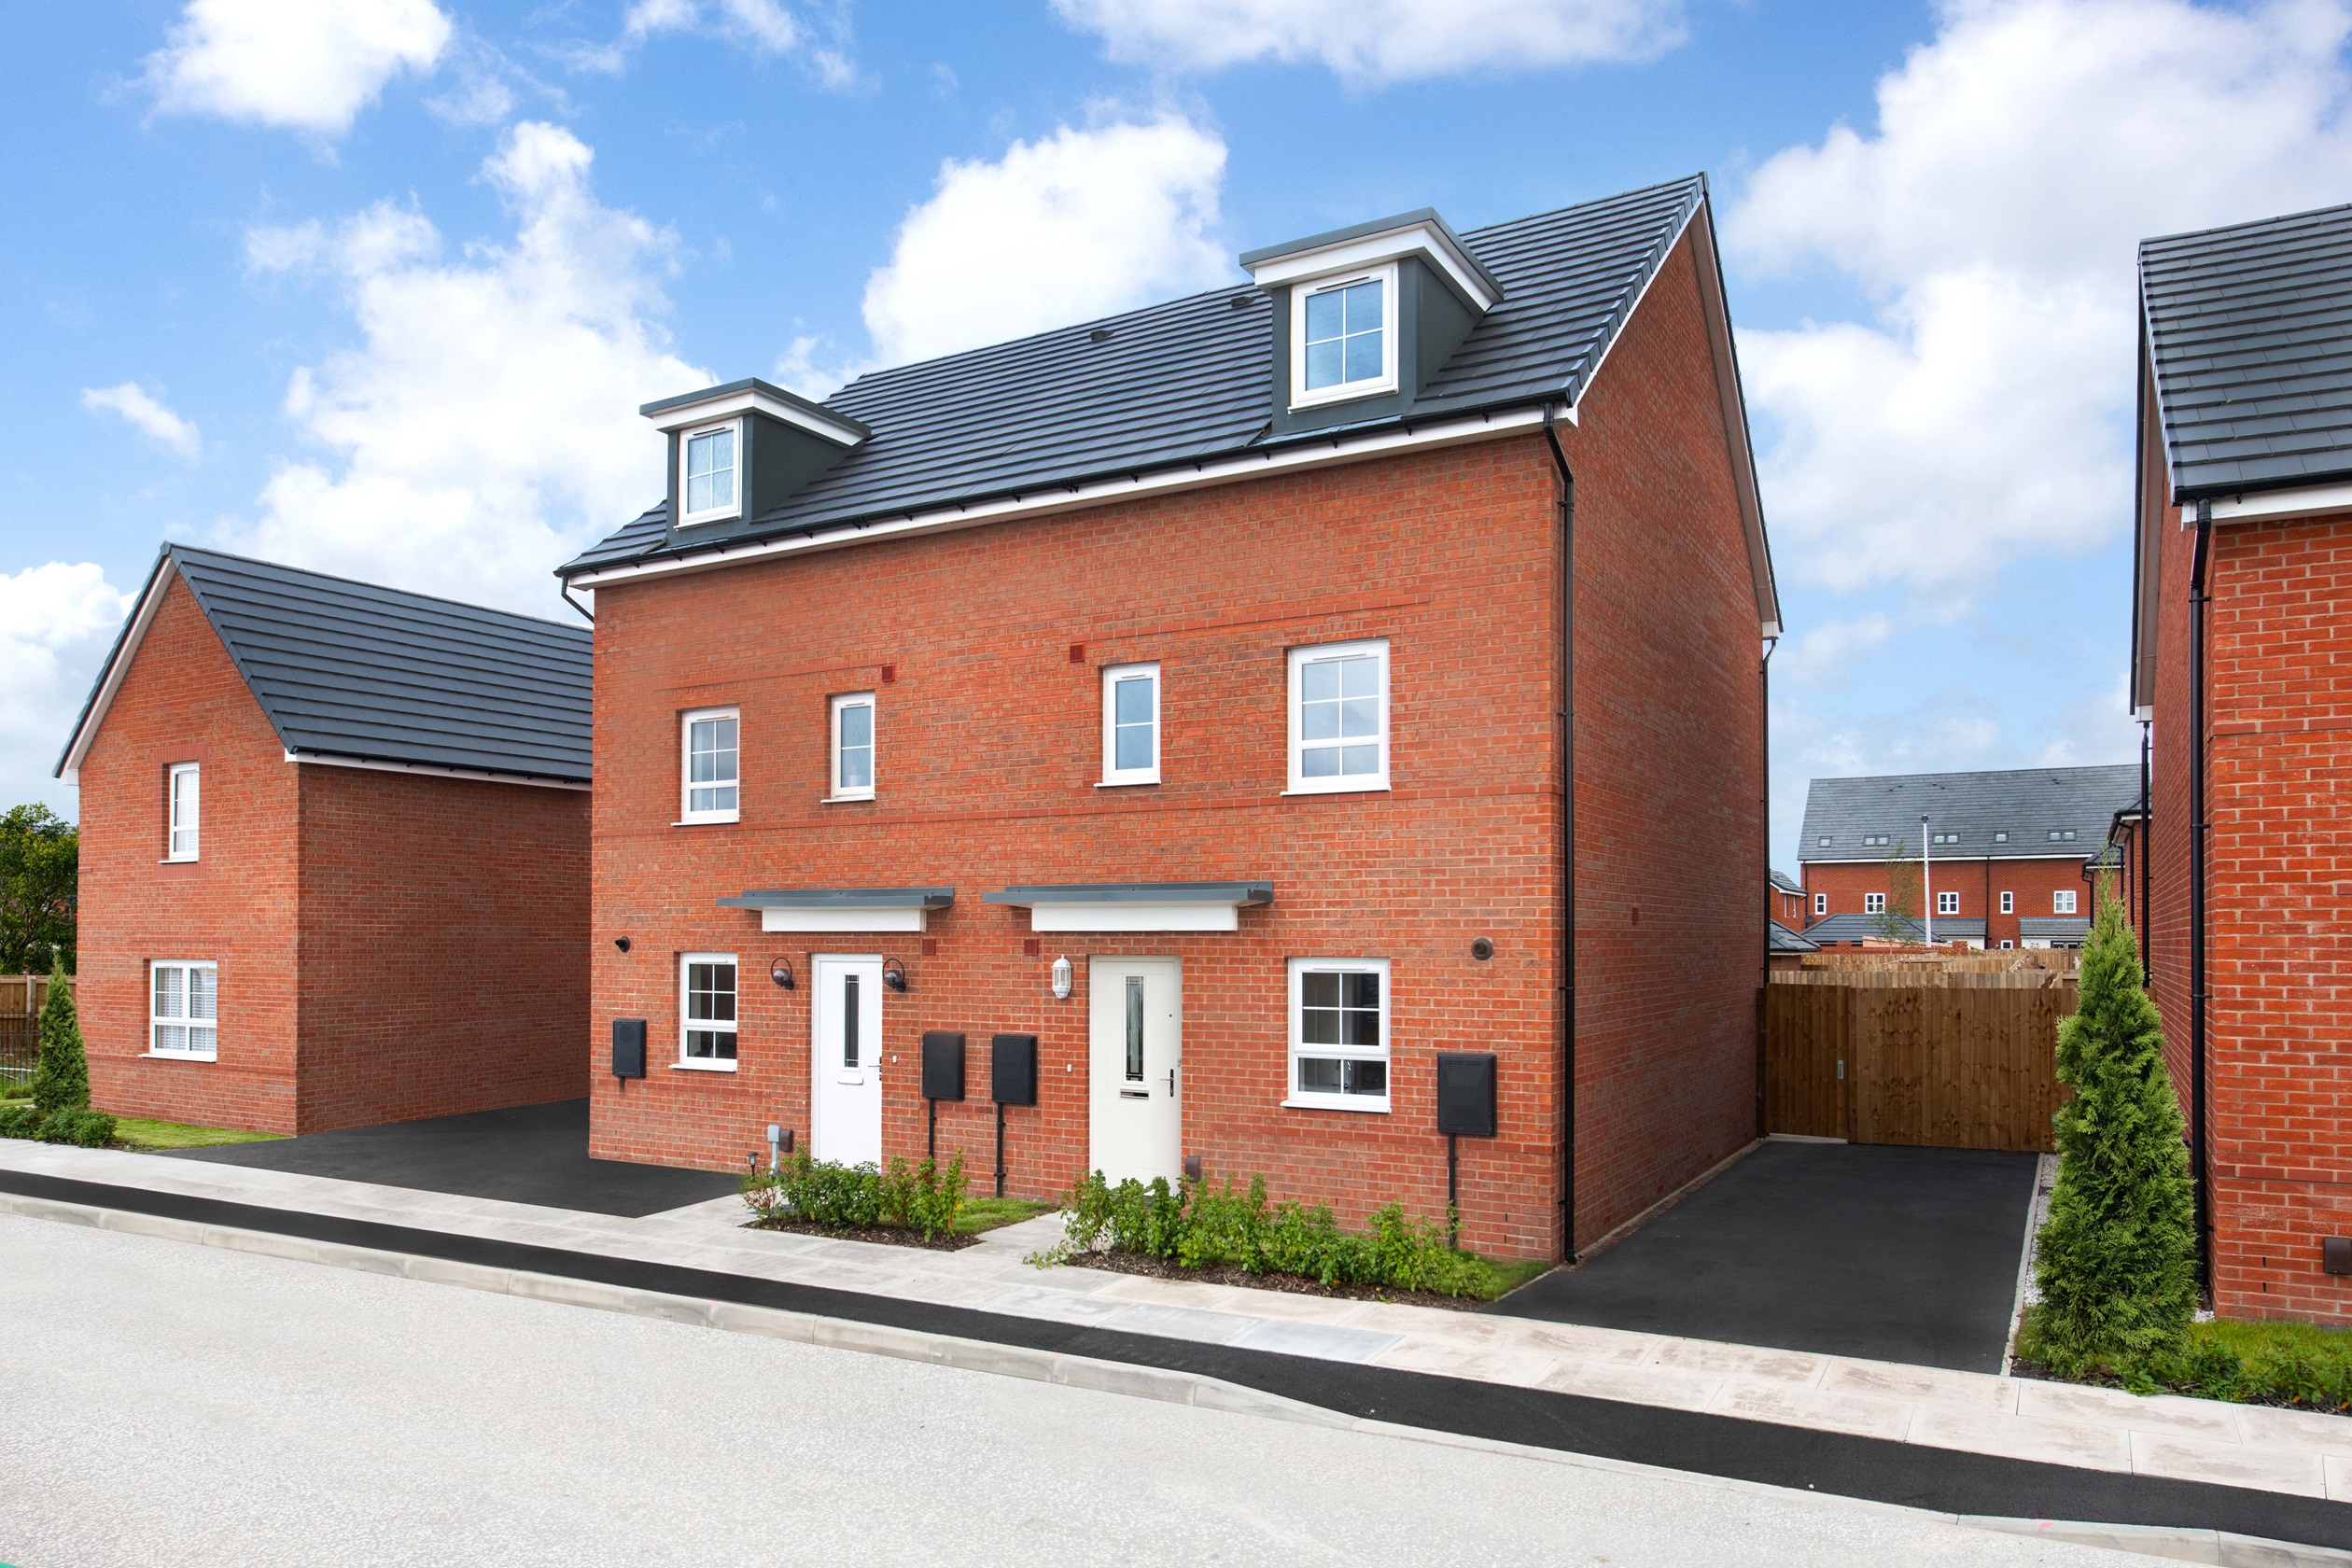 Property 1 of 10. Woodcote At Victoria Mews